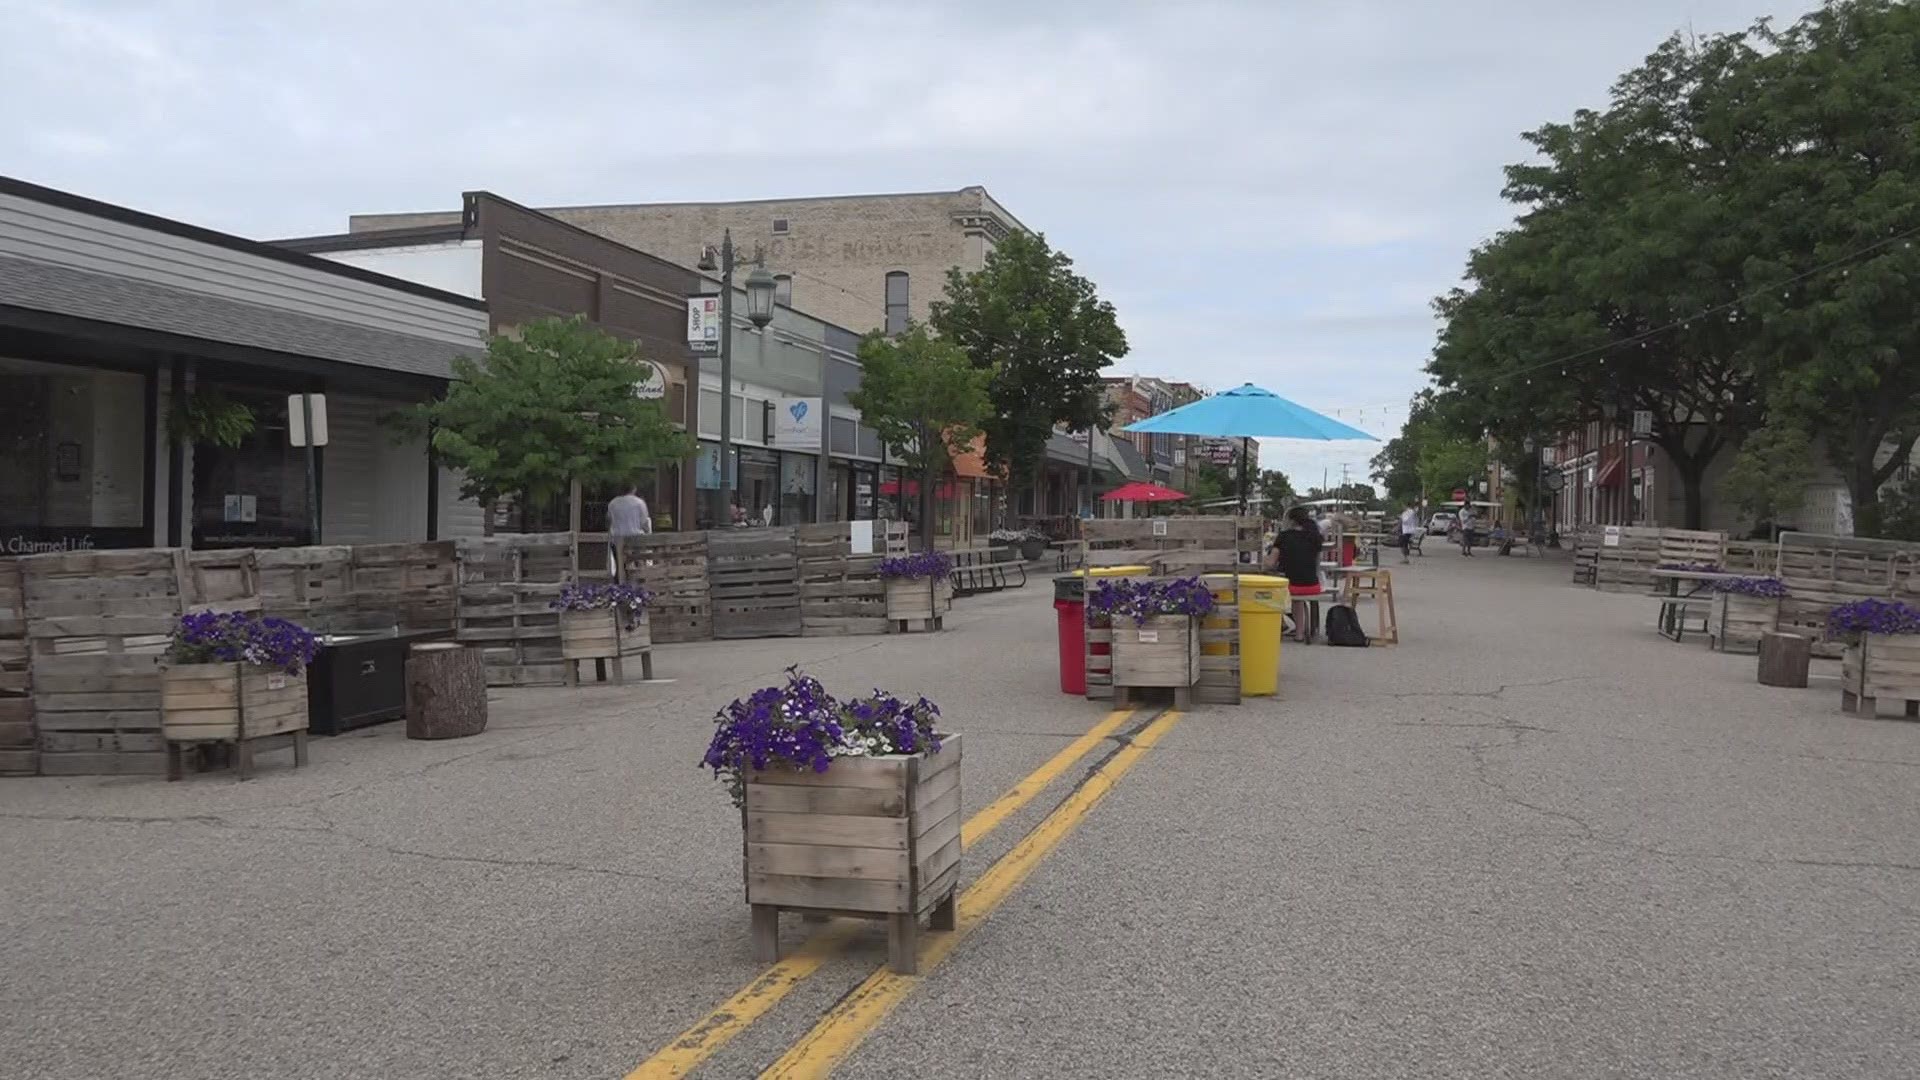 The refreshment area was beneficial to downtown businesses, but fewer people are visiting this summer, city officials said. The plan is to bring it back in the fall.